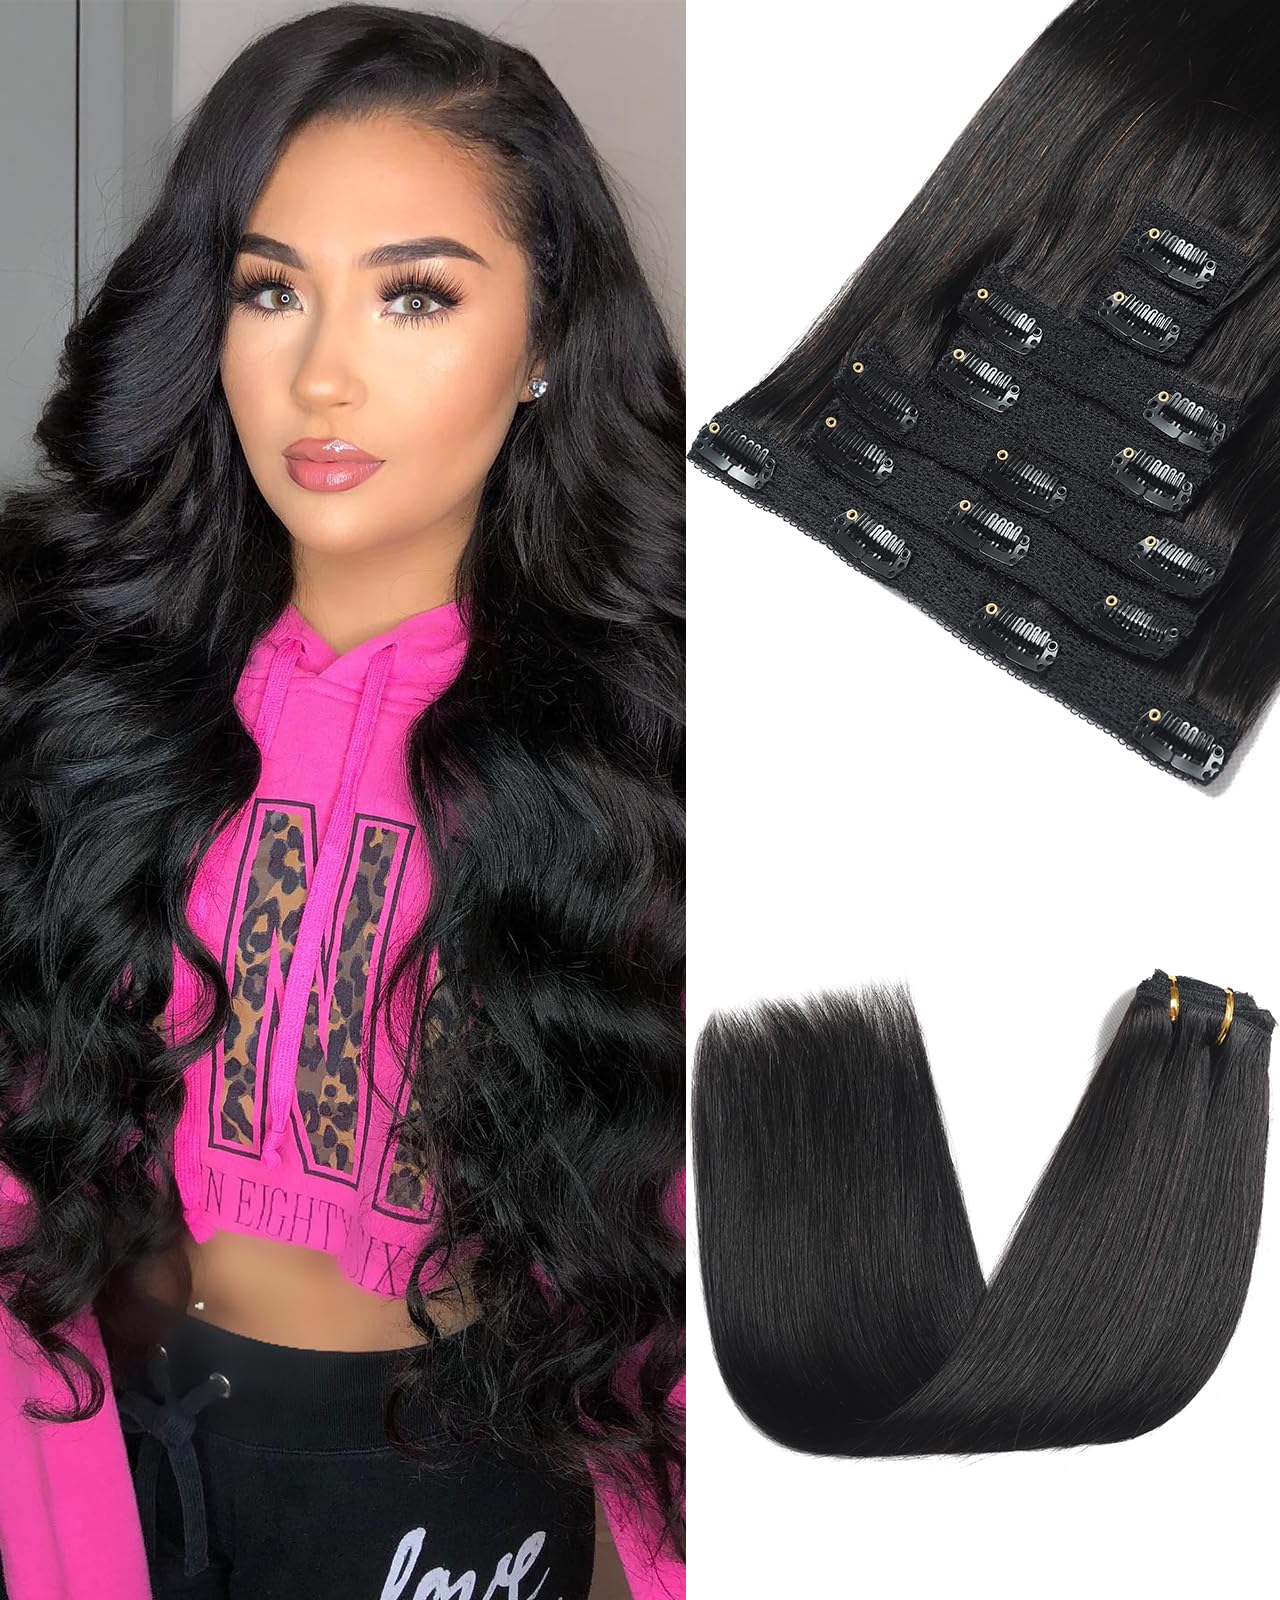 Dalise Clip in Hair Extensions